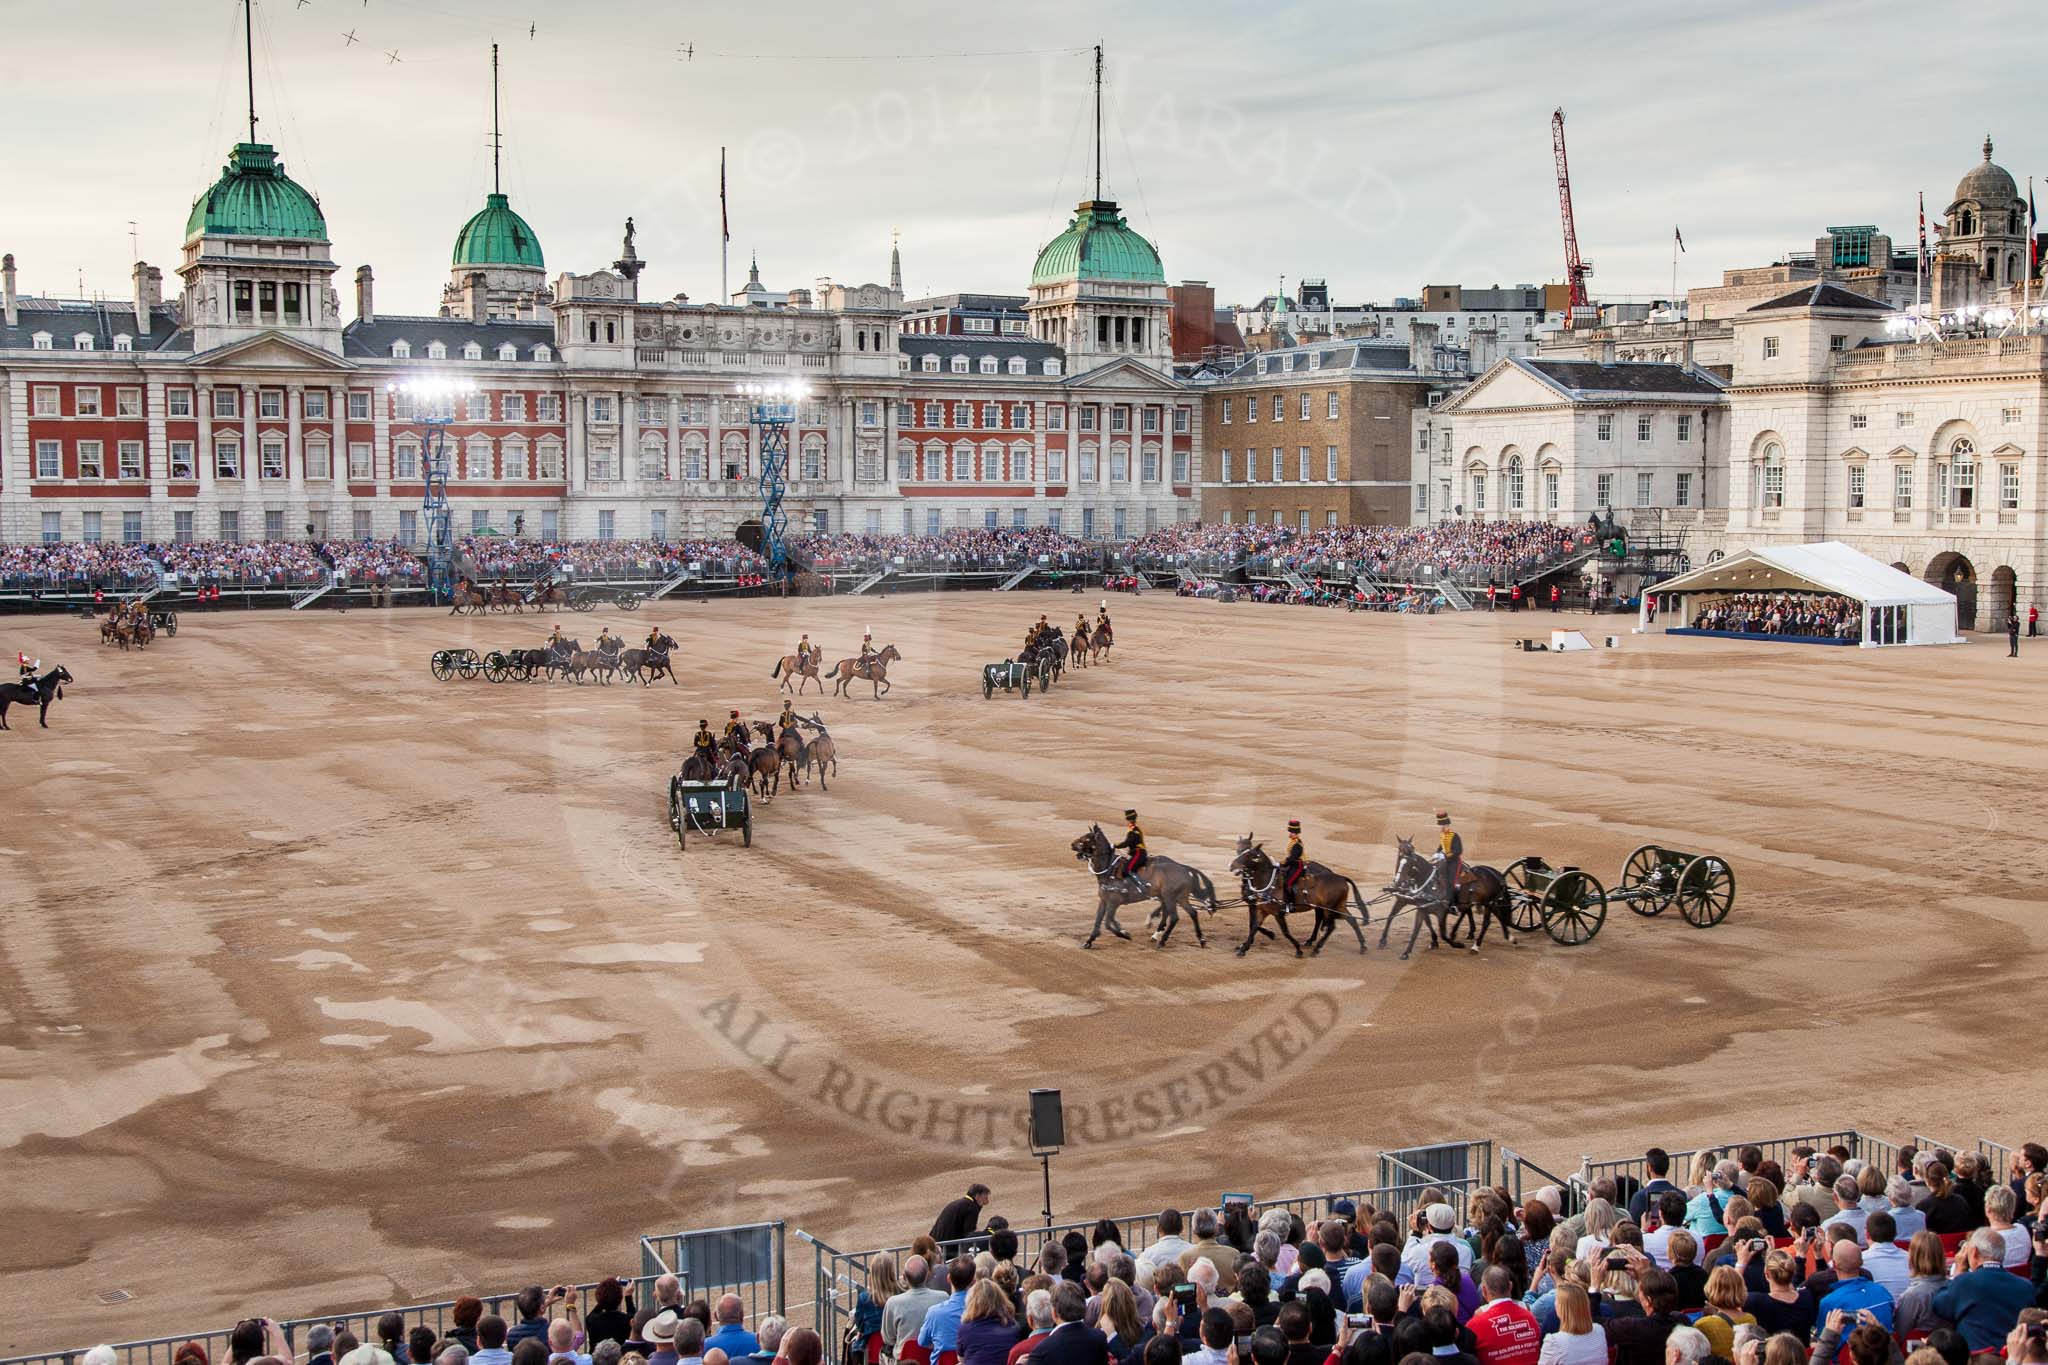 Beating Retreat 2014.
Horse Guards Parade, Westminster,
London SW1A,

United Kingdom,
on 11 June 2014 at 20:44, image #180